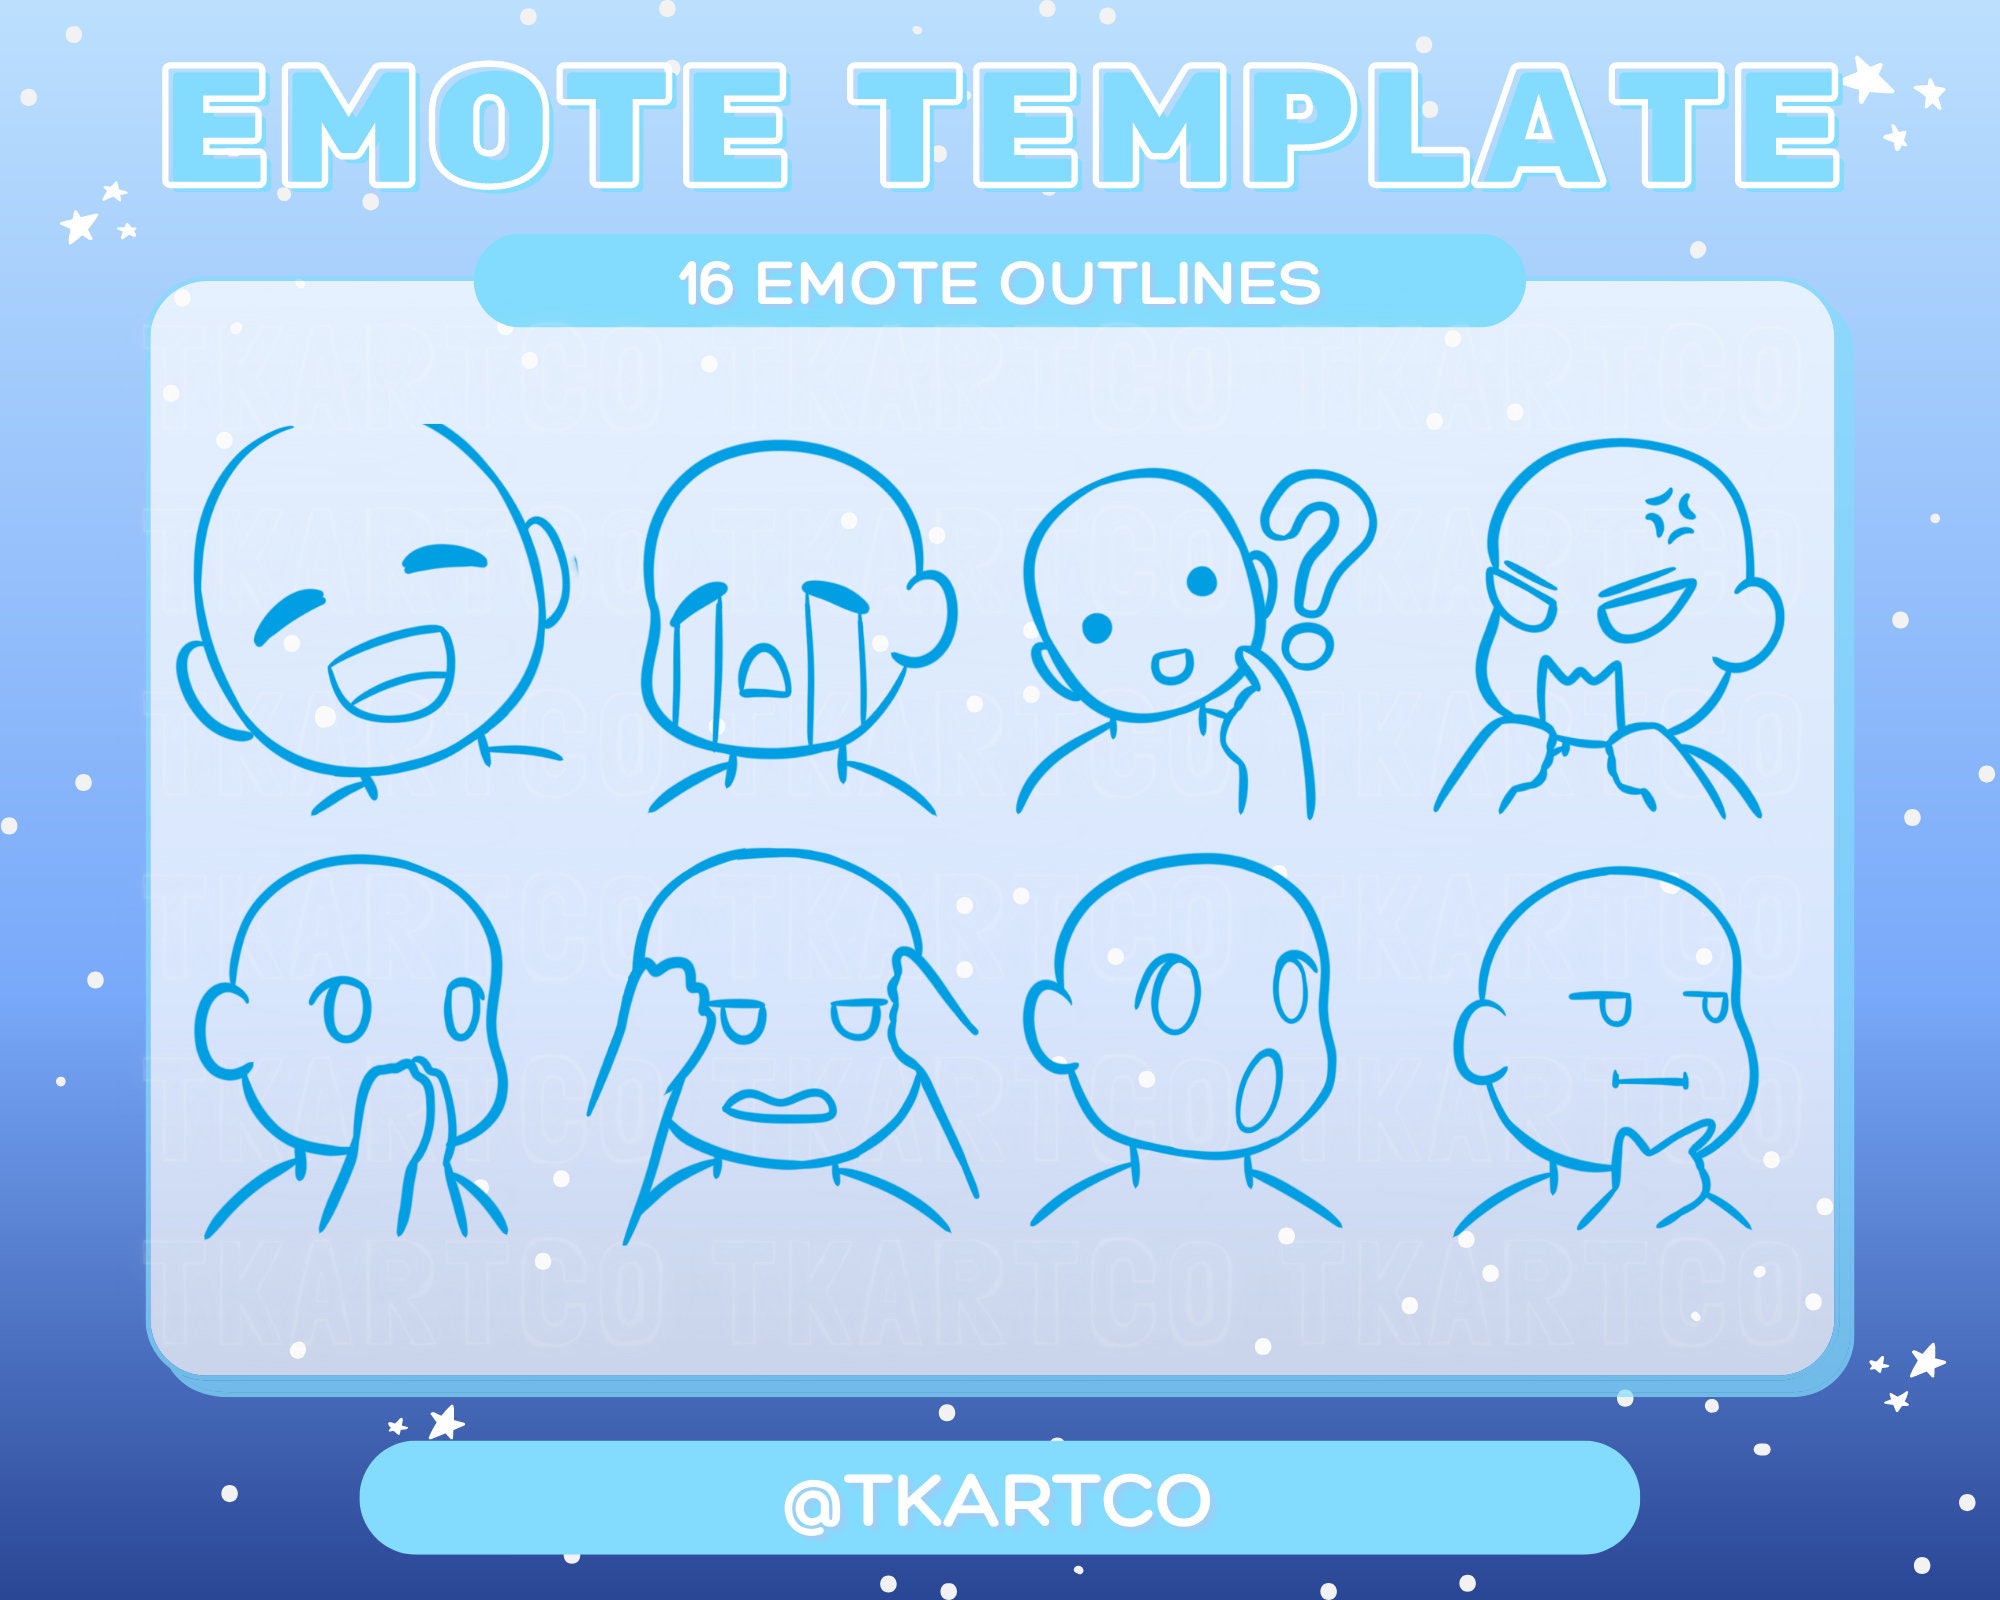 Twitch Emotes Guide - Etsy